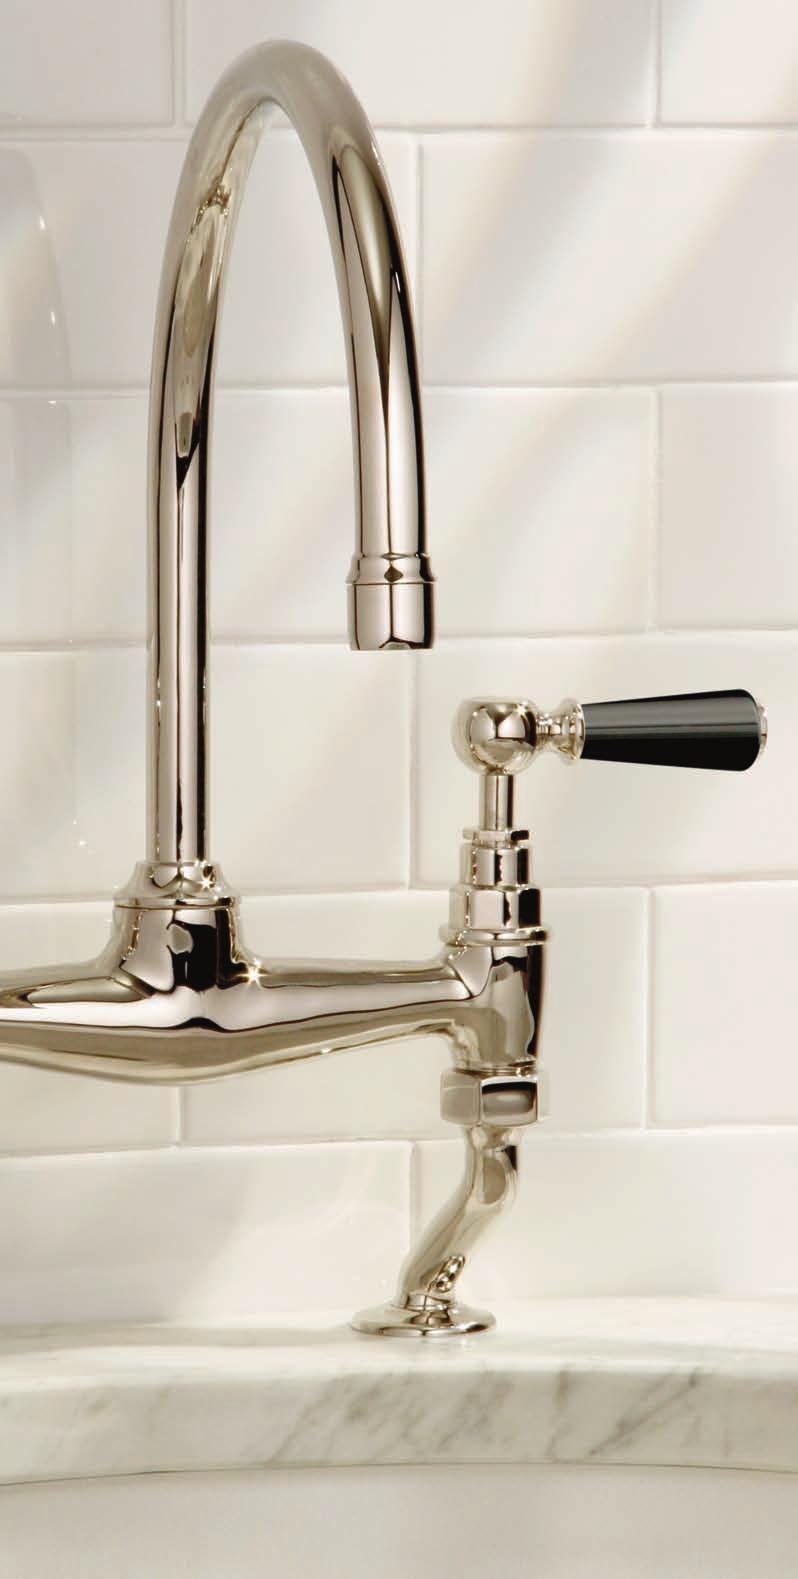 taps Right: BL 8704 Exposed Black Lever